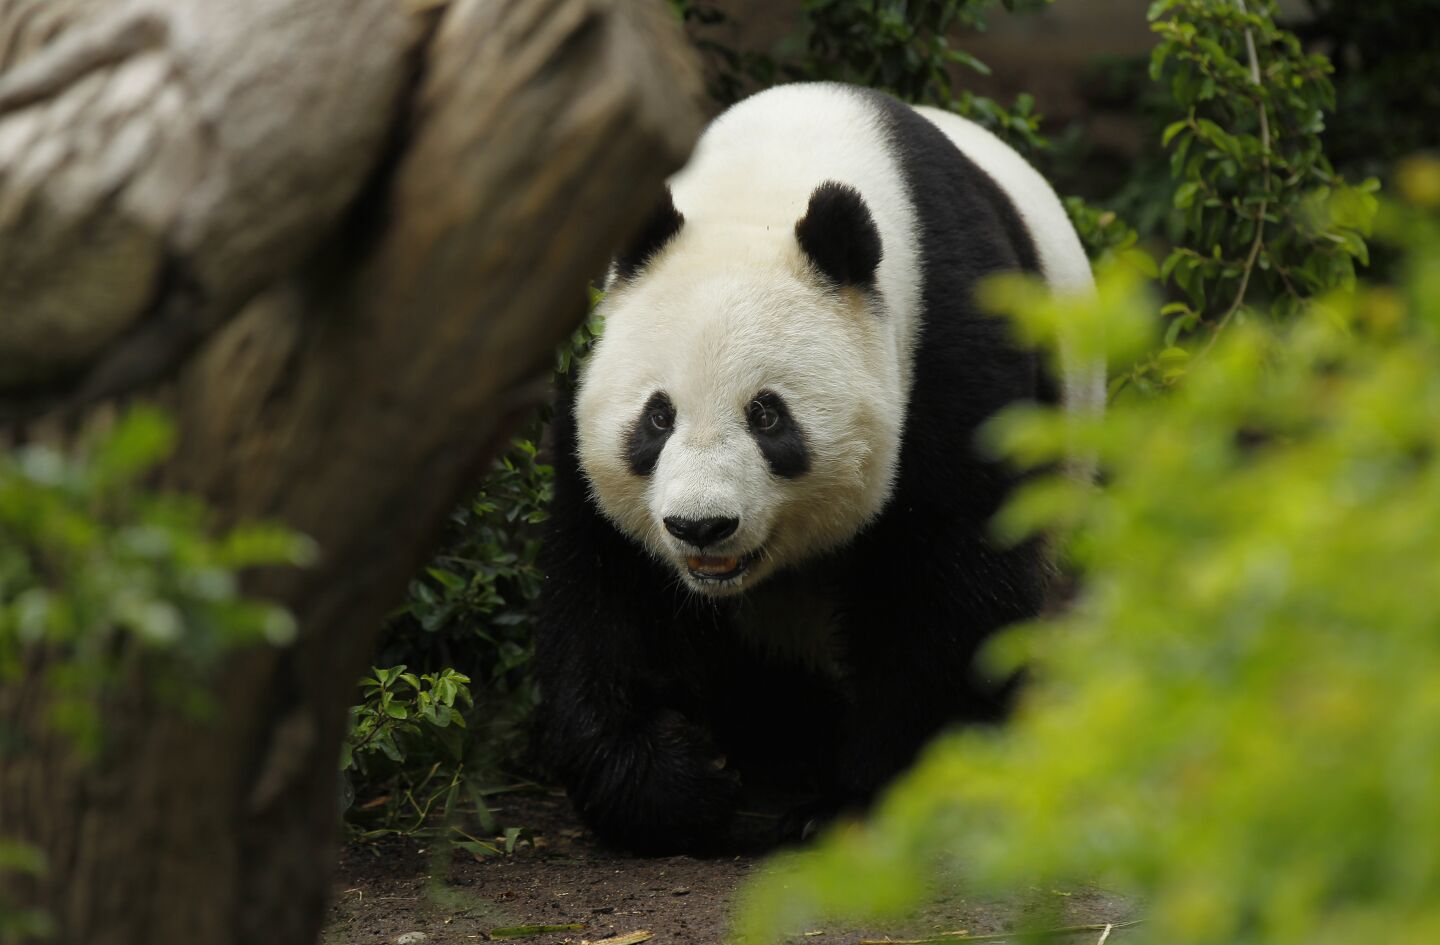 Panda Bai Yun, 27, walks through her enclosure at the San Diego Zoo on April 16, 2019. The last public day to see the pandas is April 29th, before they head back to China.